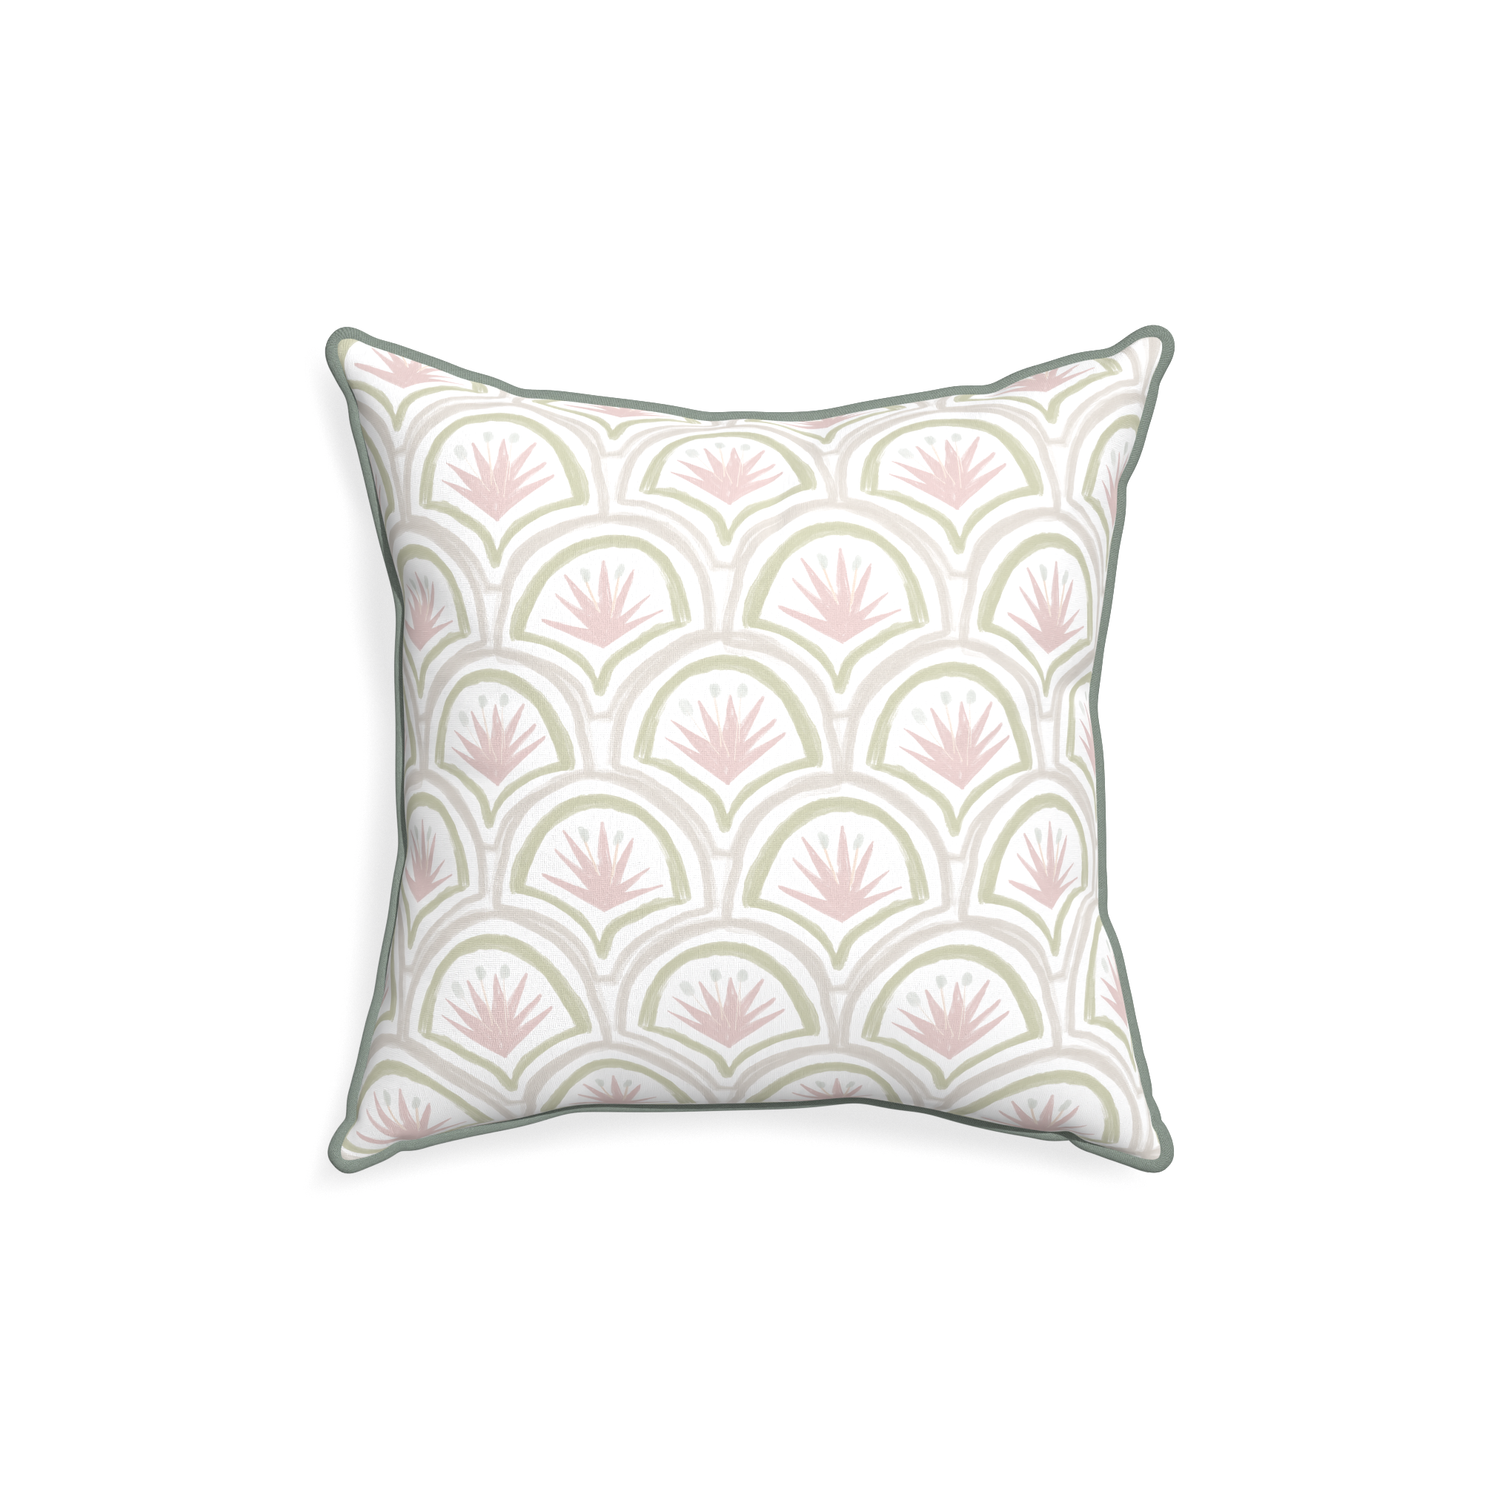 18-square thatcher rose custom pink & green palmpillow with sage piping on white background